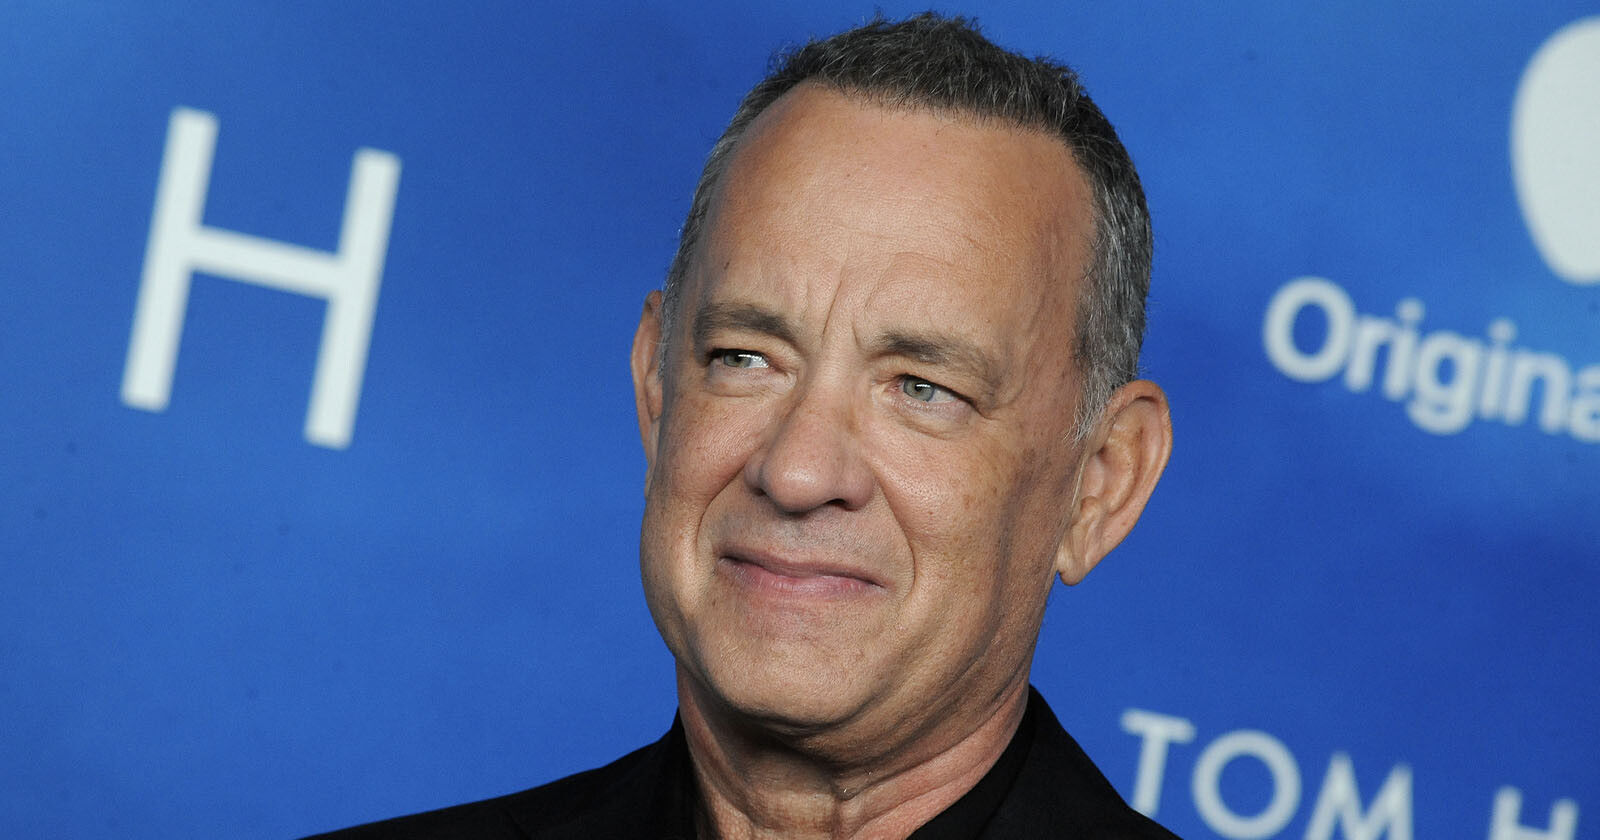 Tom Hanks Says AI Could Allow Him to Star in Movies After His Death